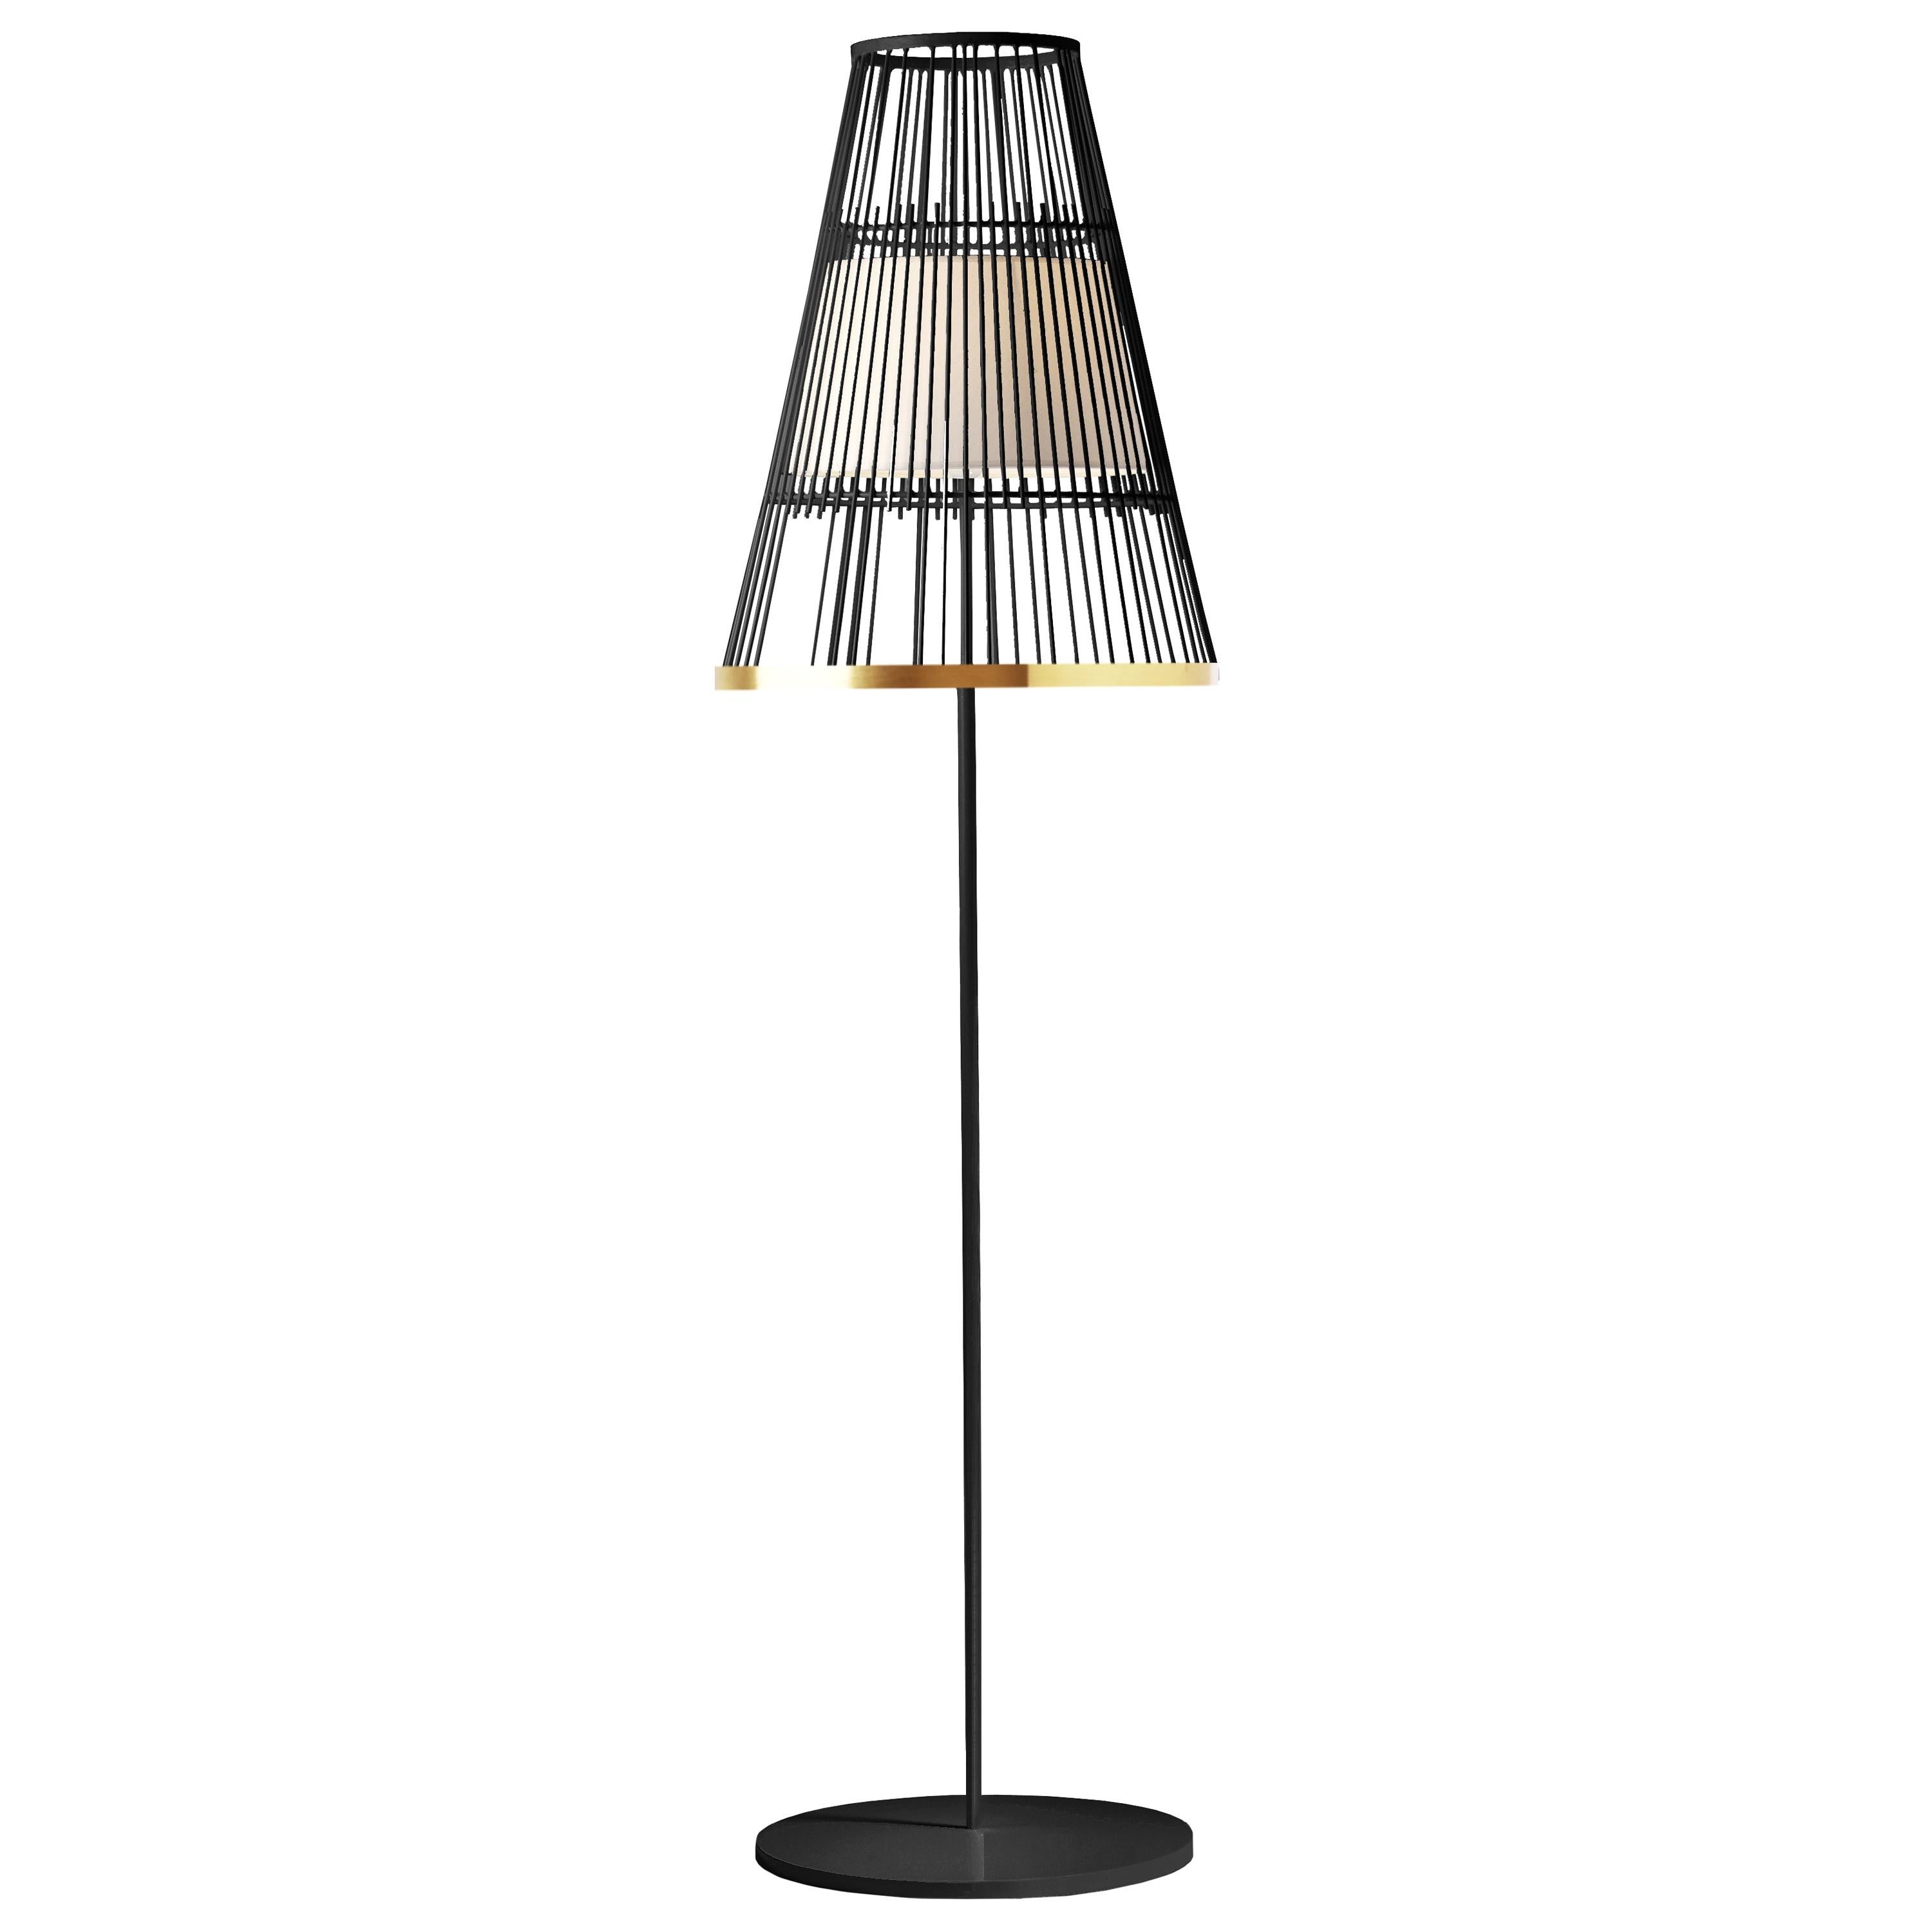 Contemporary Art Deco Inspired Up Floor Lamp Black Powder Coated, Polished Brass For Sale